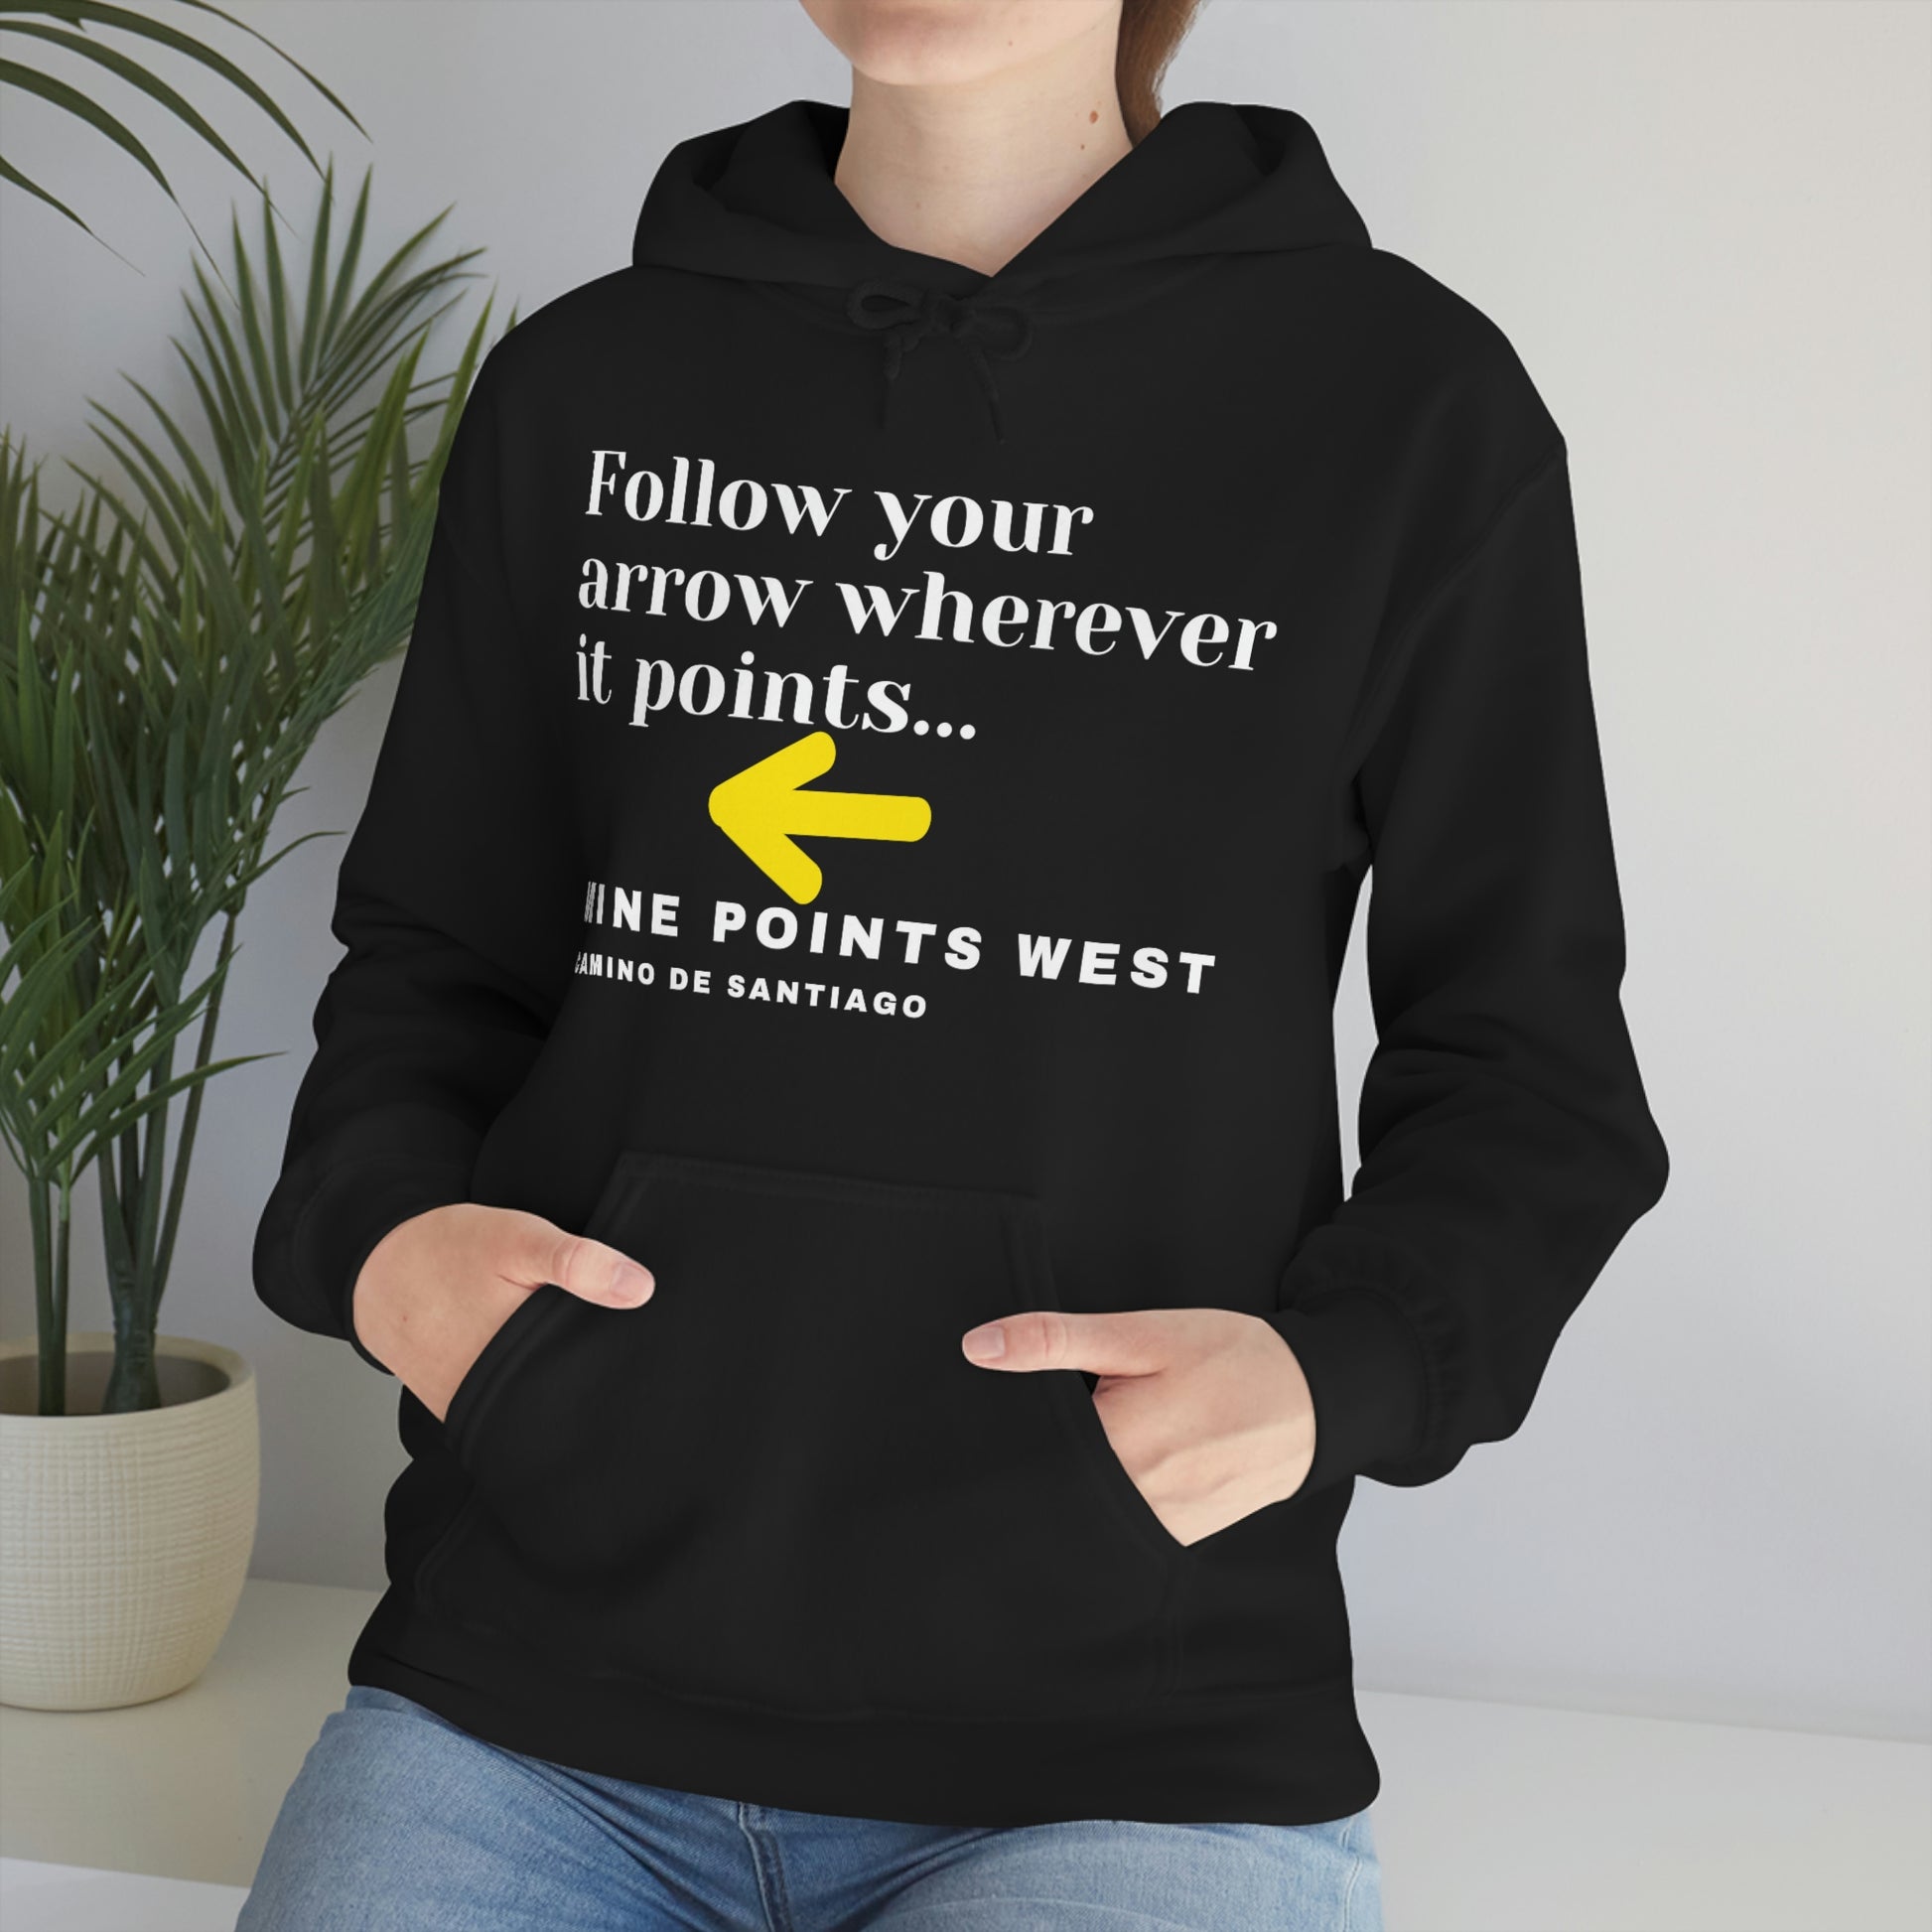 Camino Frances - Hiking Hoodies - Follow Your Arrow Wherever It Points . . . Mine Points West - Camino de Sanrtiago with Yellow Arrow. Gifts for Hikers.